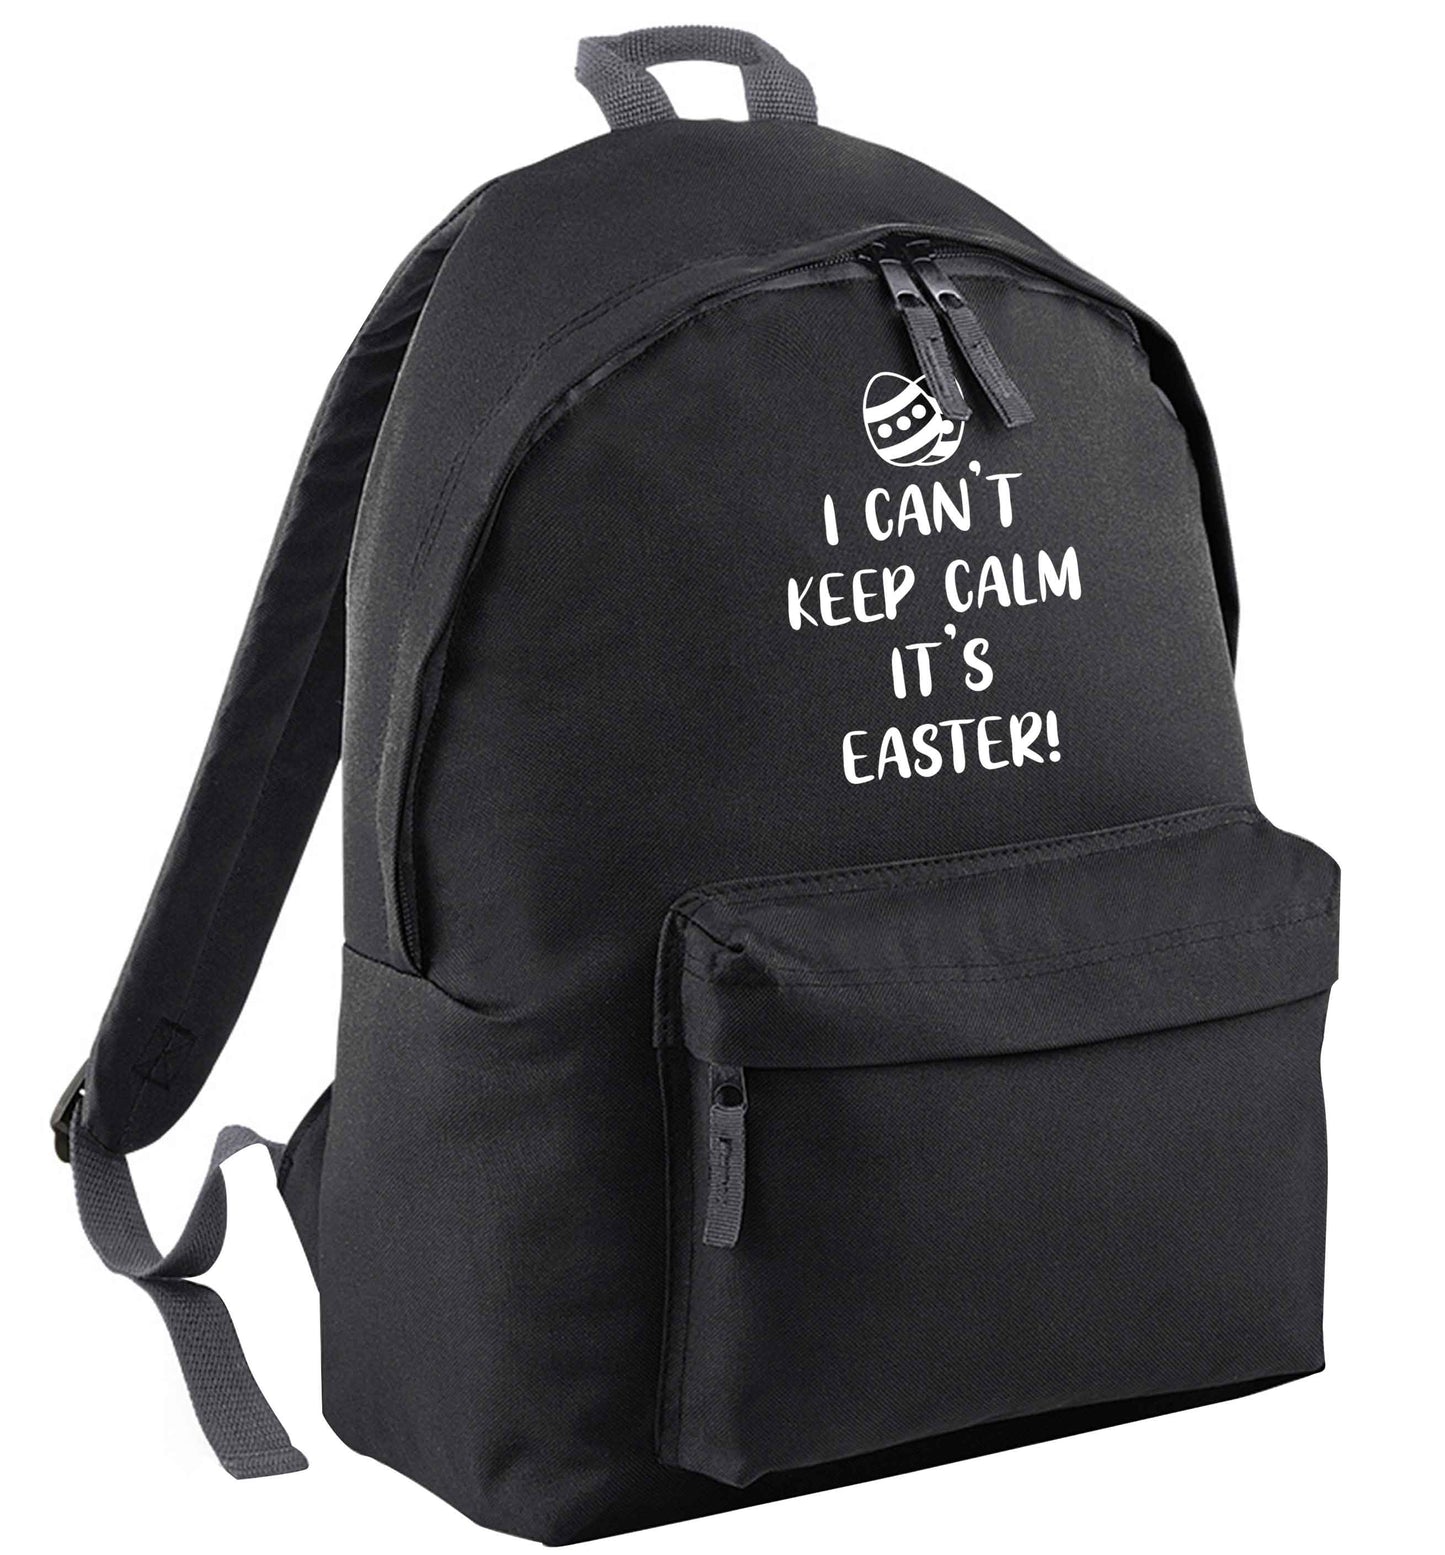 I can't keep calm it's Easter black adults backpack